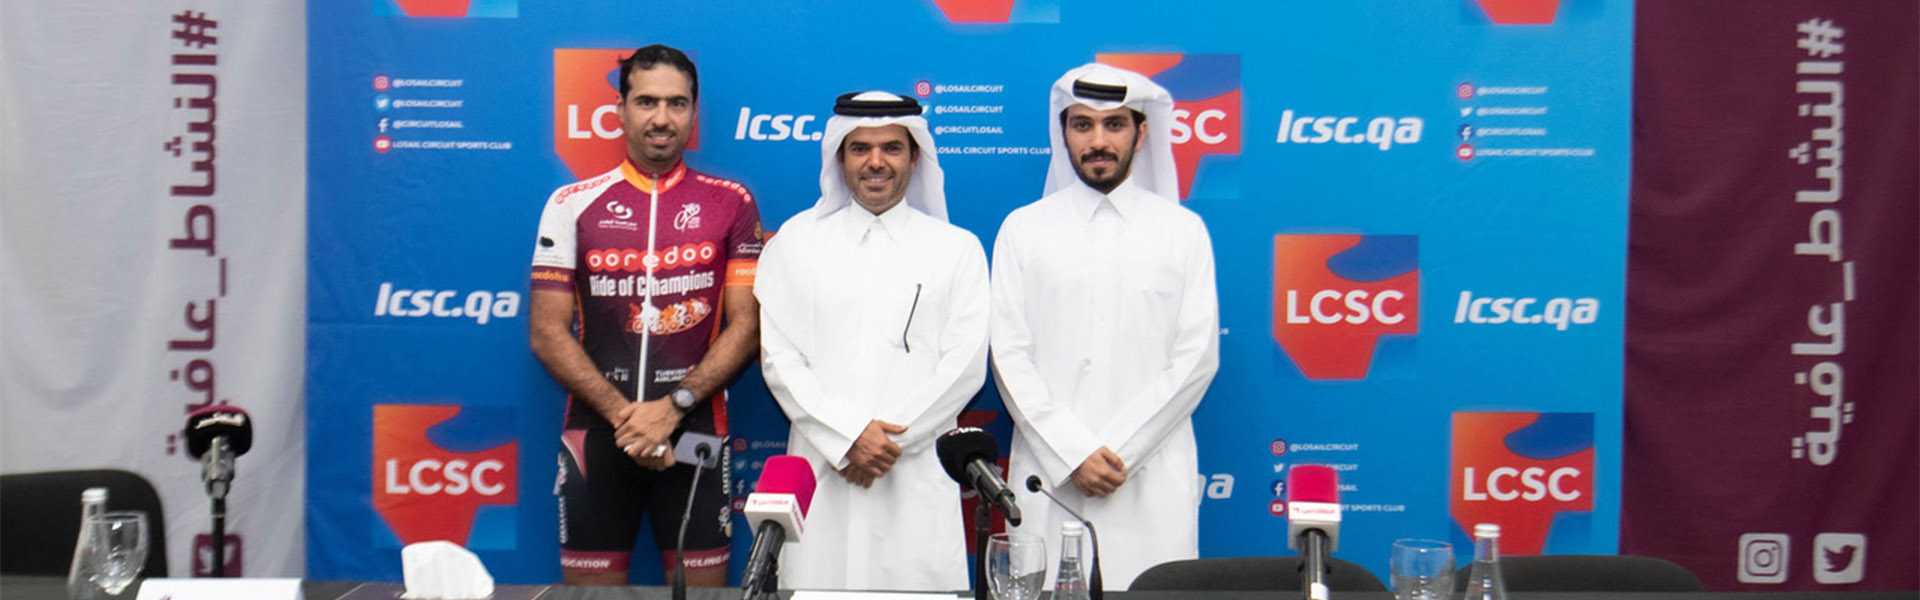 LCSC in partnership with Qatar Sports for All Federation and Qatar Cyclists ready for another Training Days season